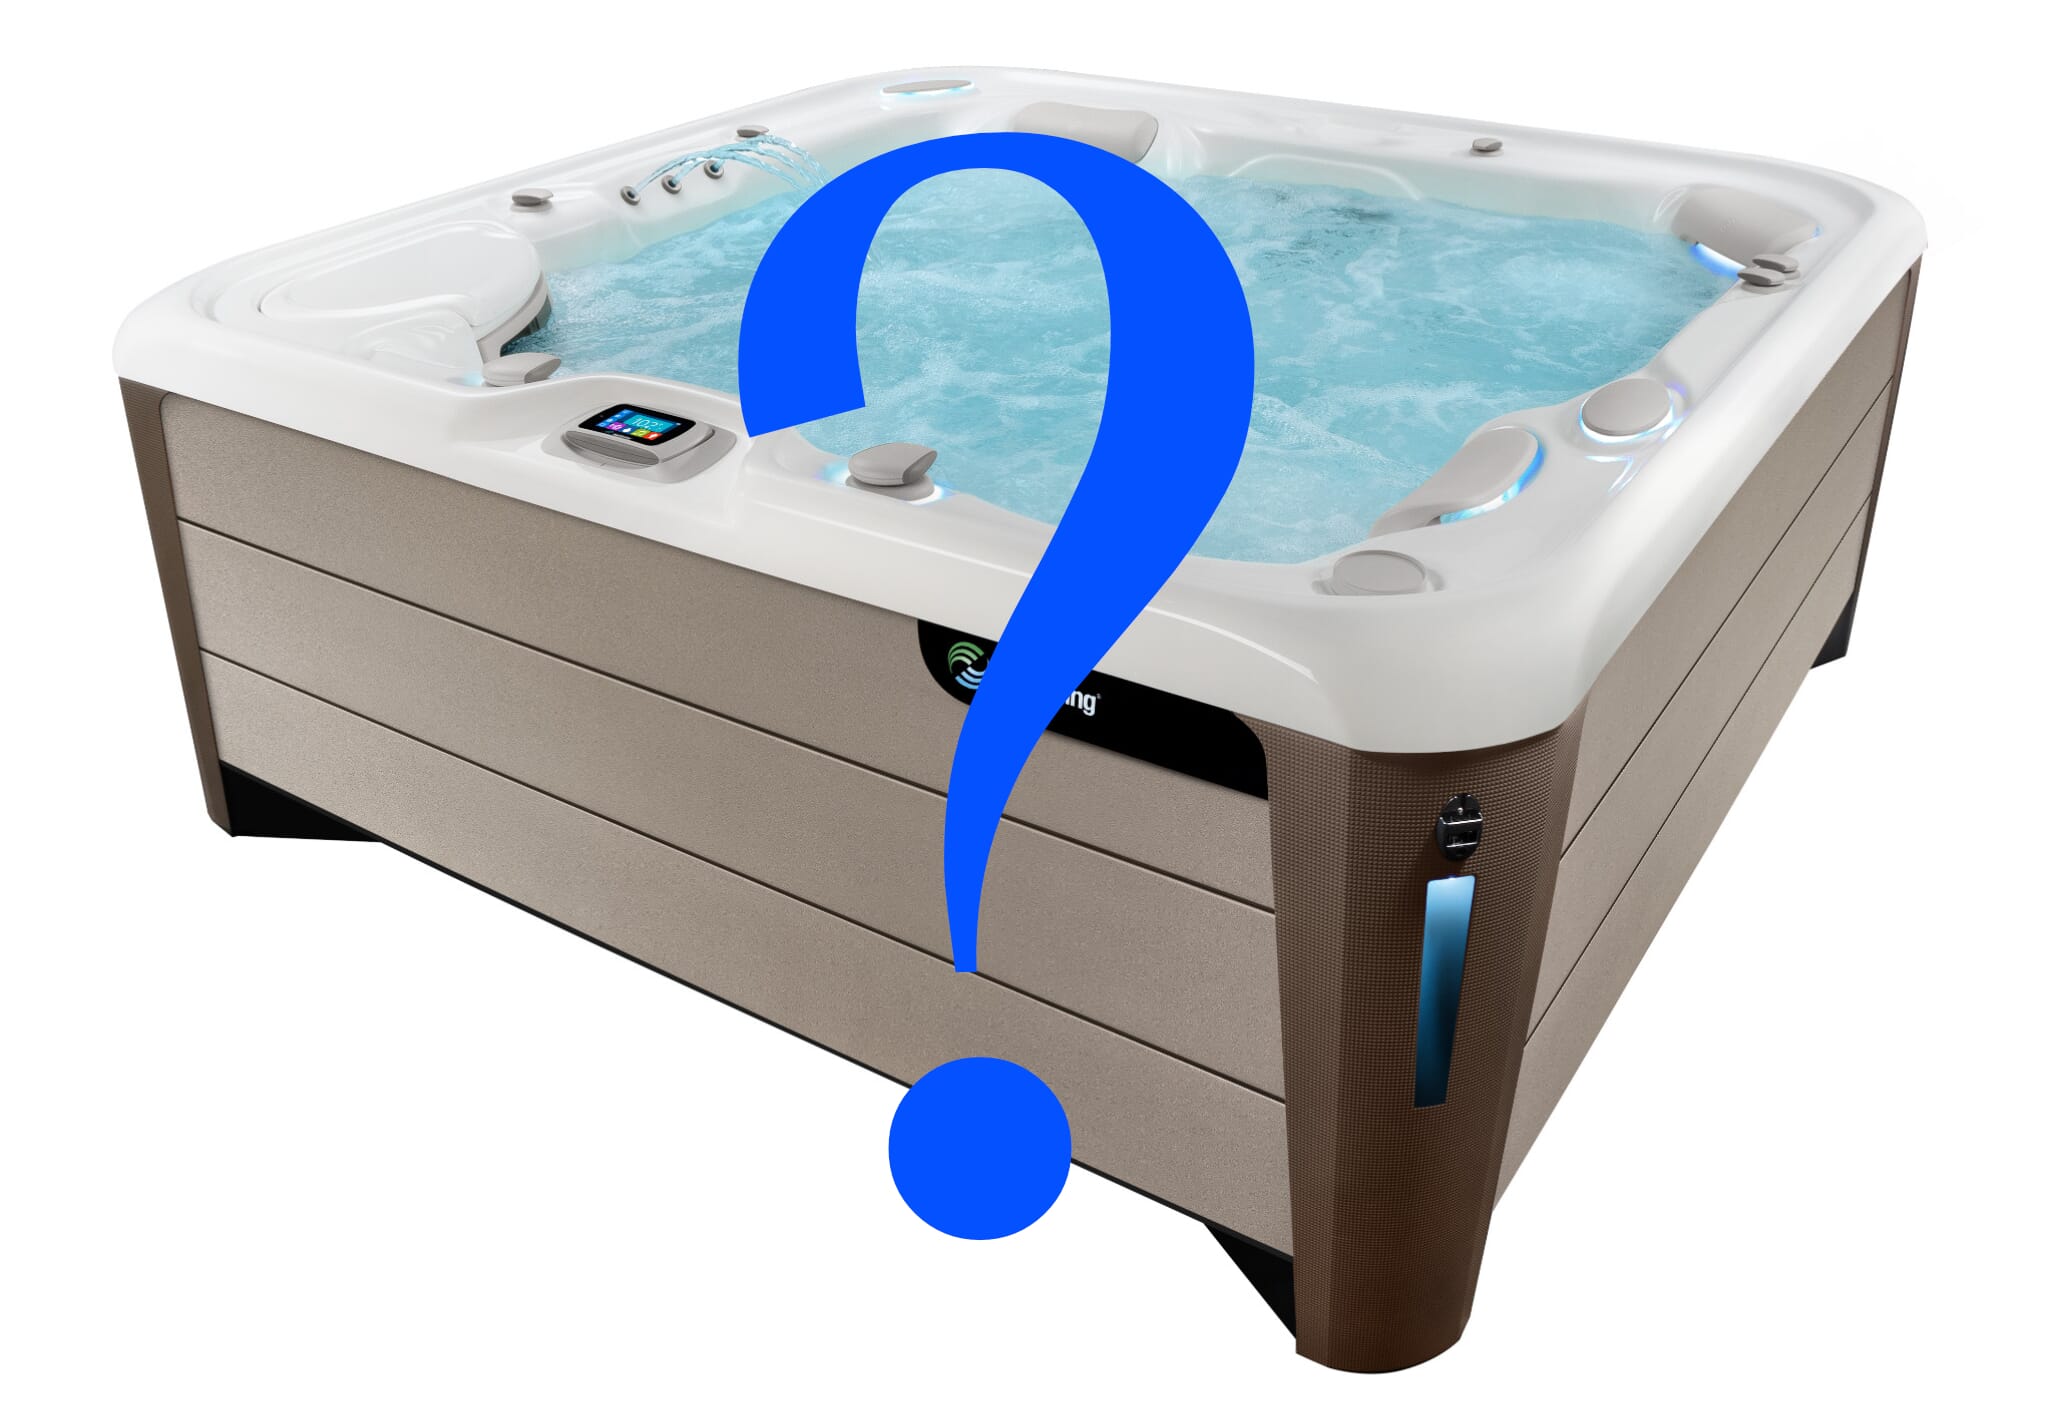 What Hot Spring Hot Tub Is Best For Me?